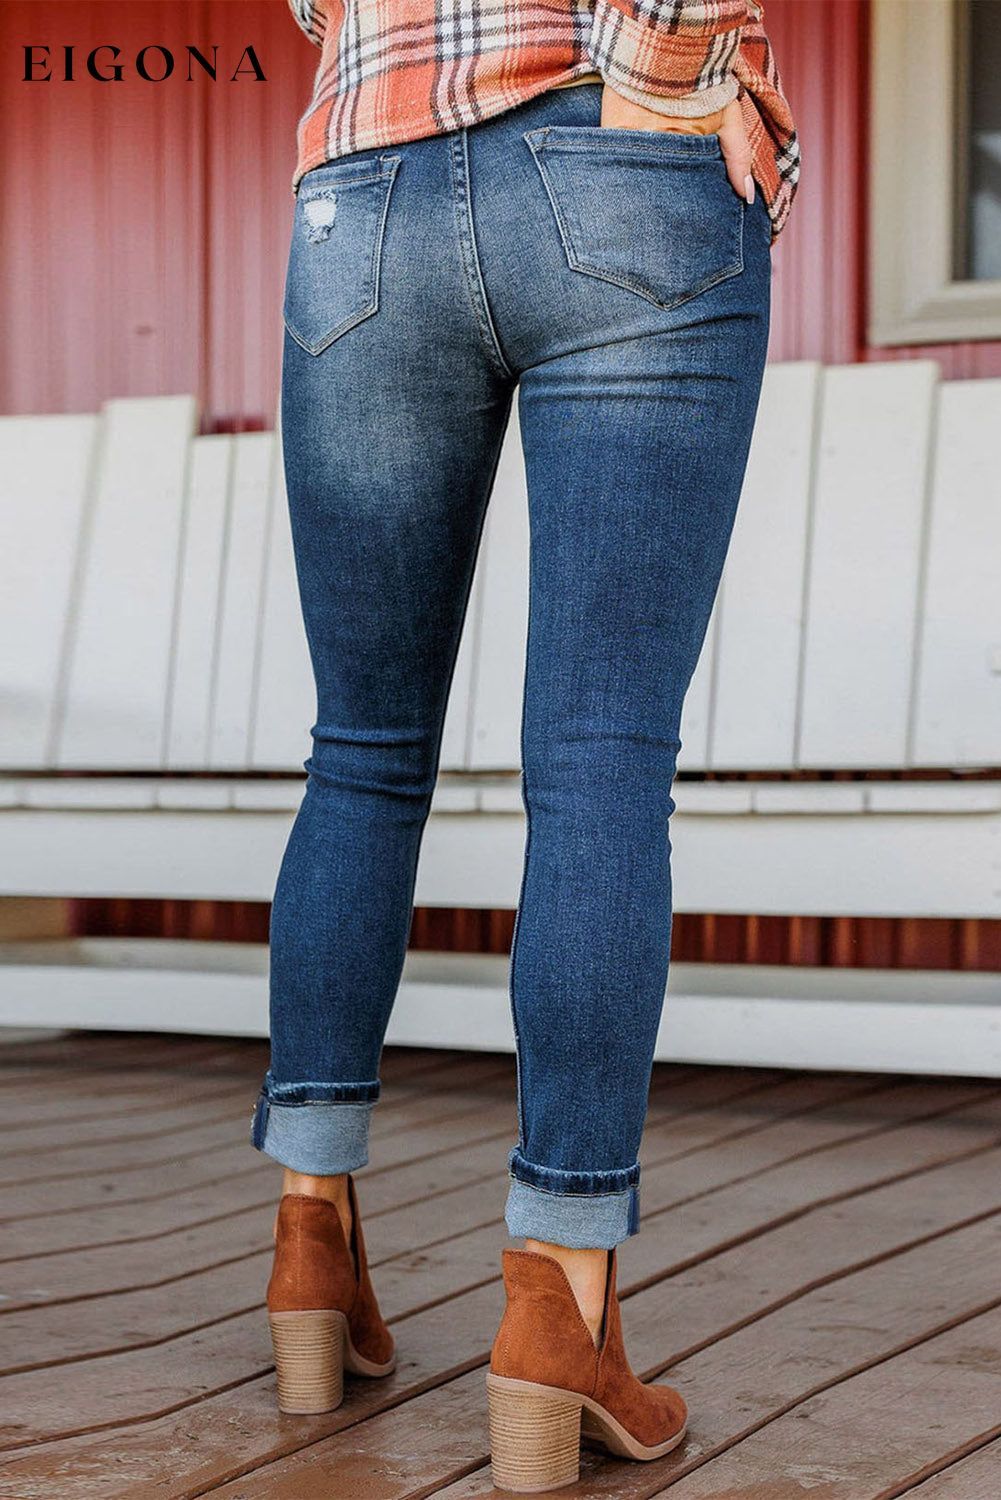 Blue Distressed Button Fly High Waist Skinny Jeans All In Stock Best Sellers bottom clothes Color Blue Craft Distressed Early Fall Collection Fabric Denim Hot picks jeans Occasion Daily pants Season Spring Style Southern Belle